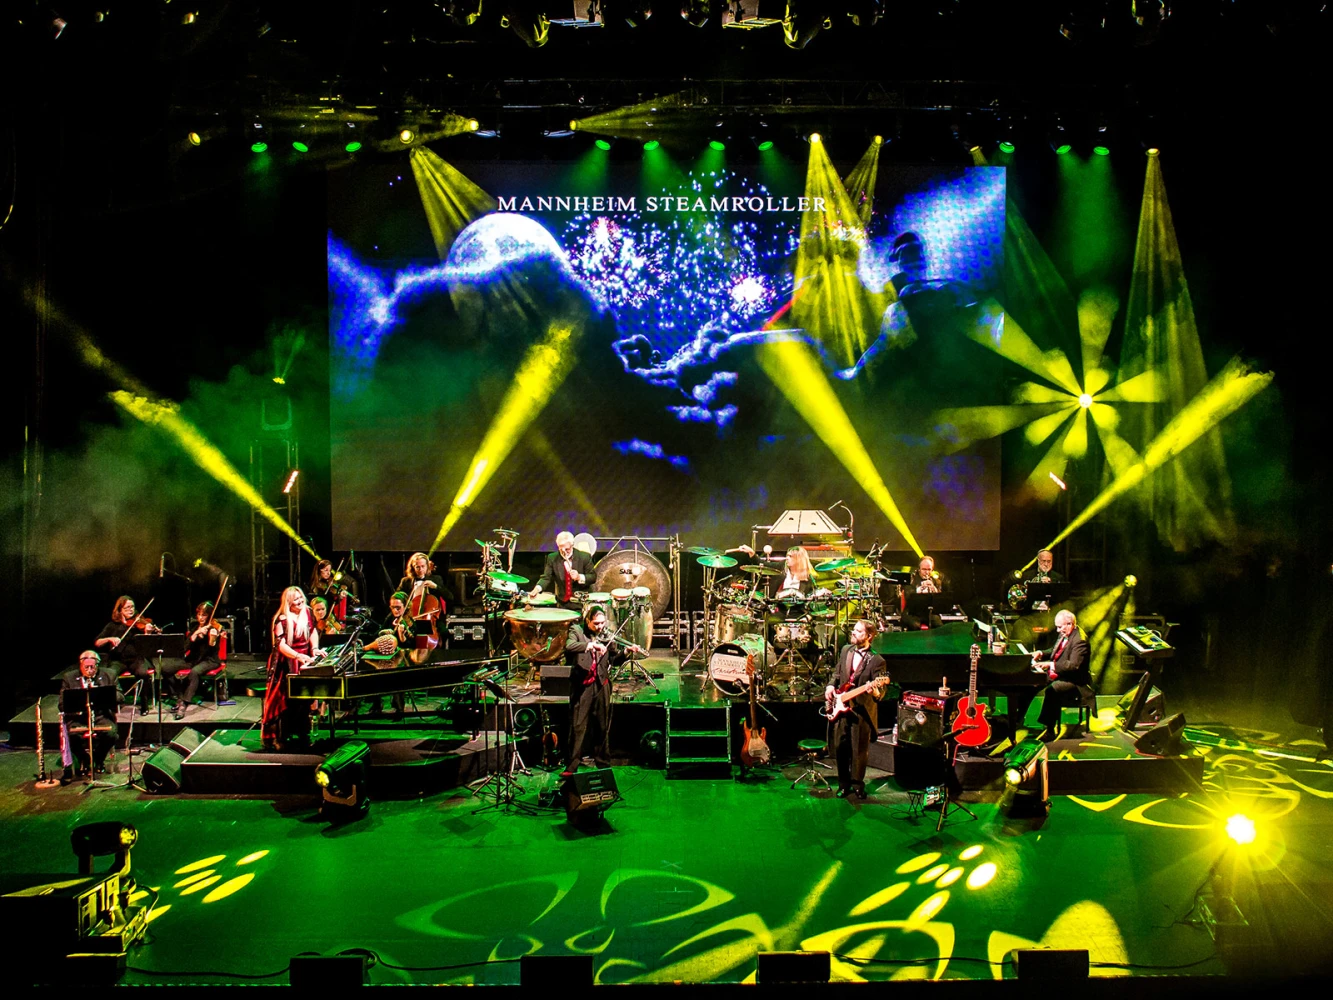 MANNHEIM STEAMROLLER CHRISTMAS BY CHIP DAVIS: What to expect - 1